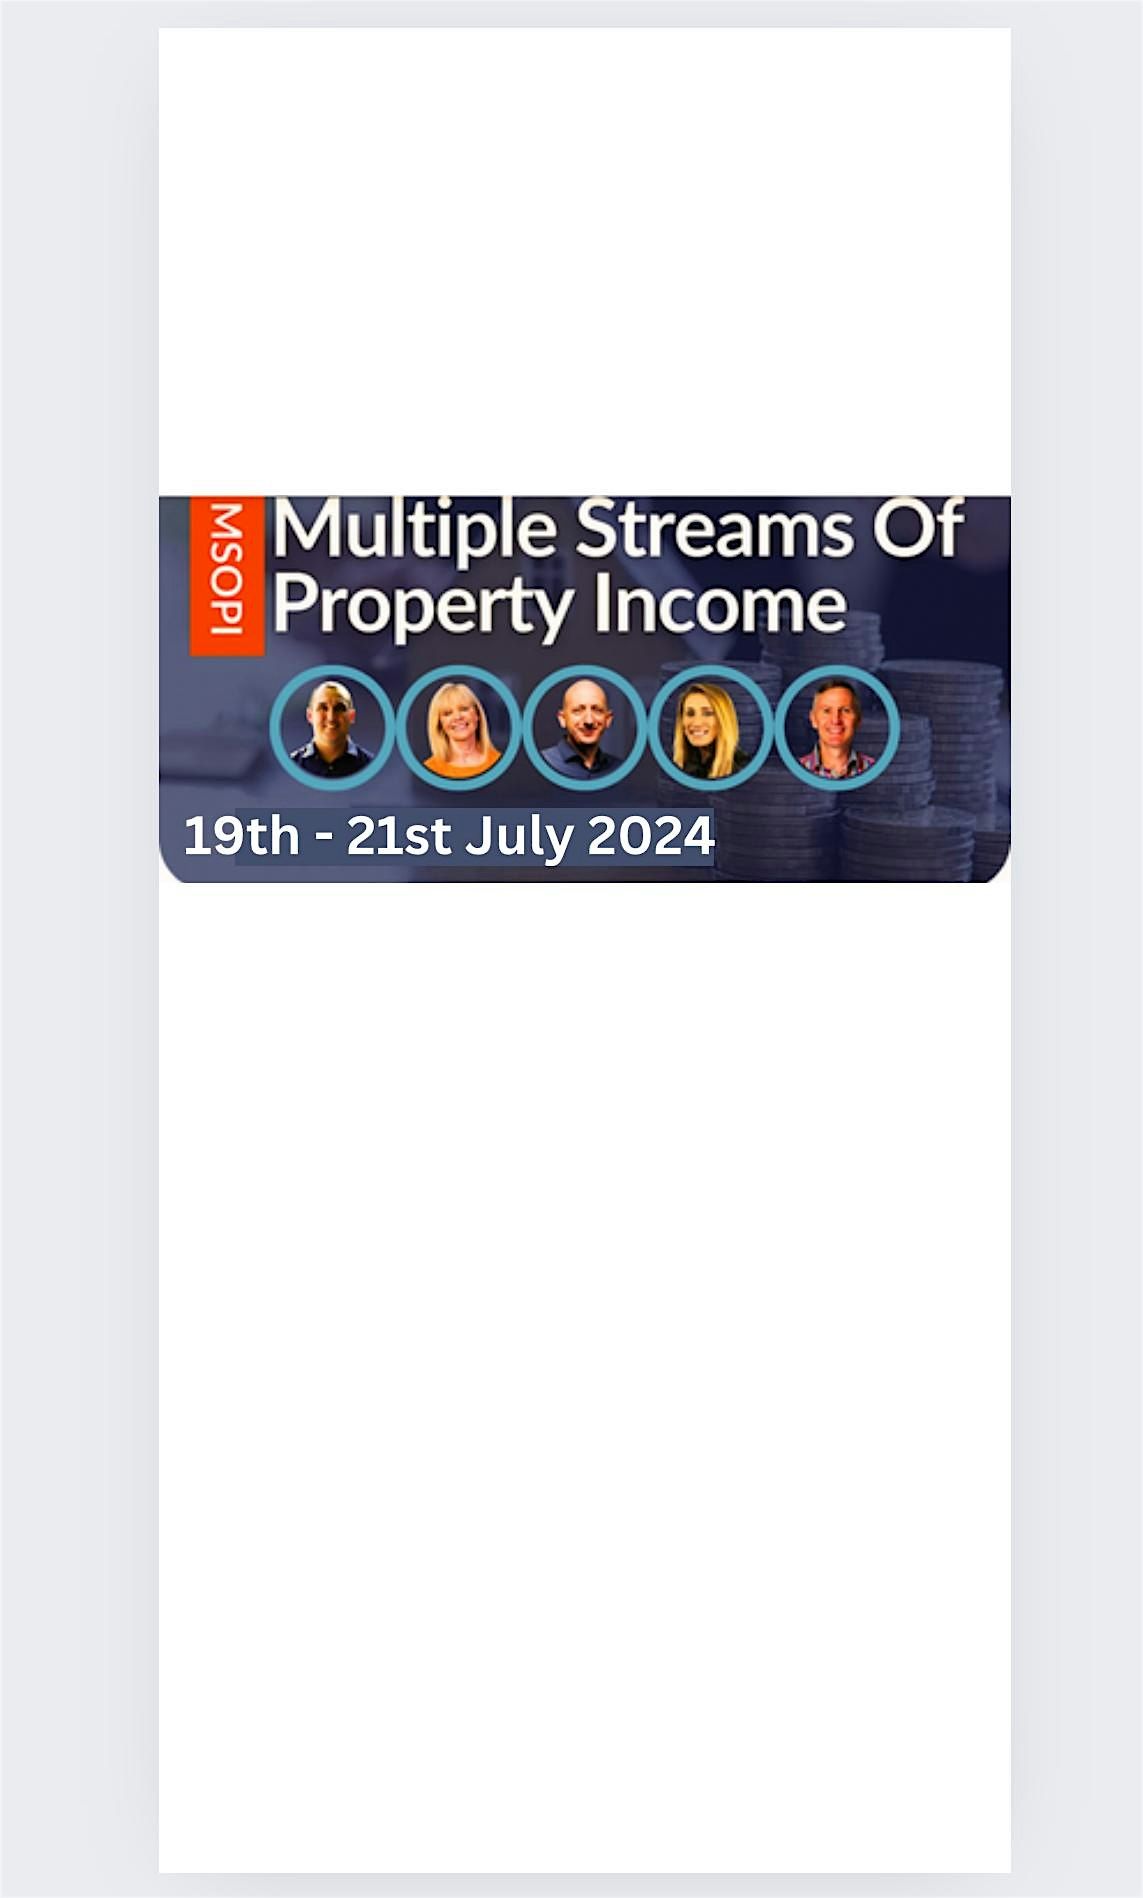 Property Networking Event | Multiple Streams of Property Income